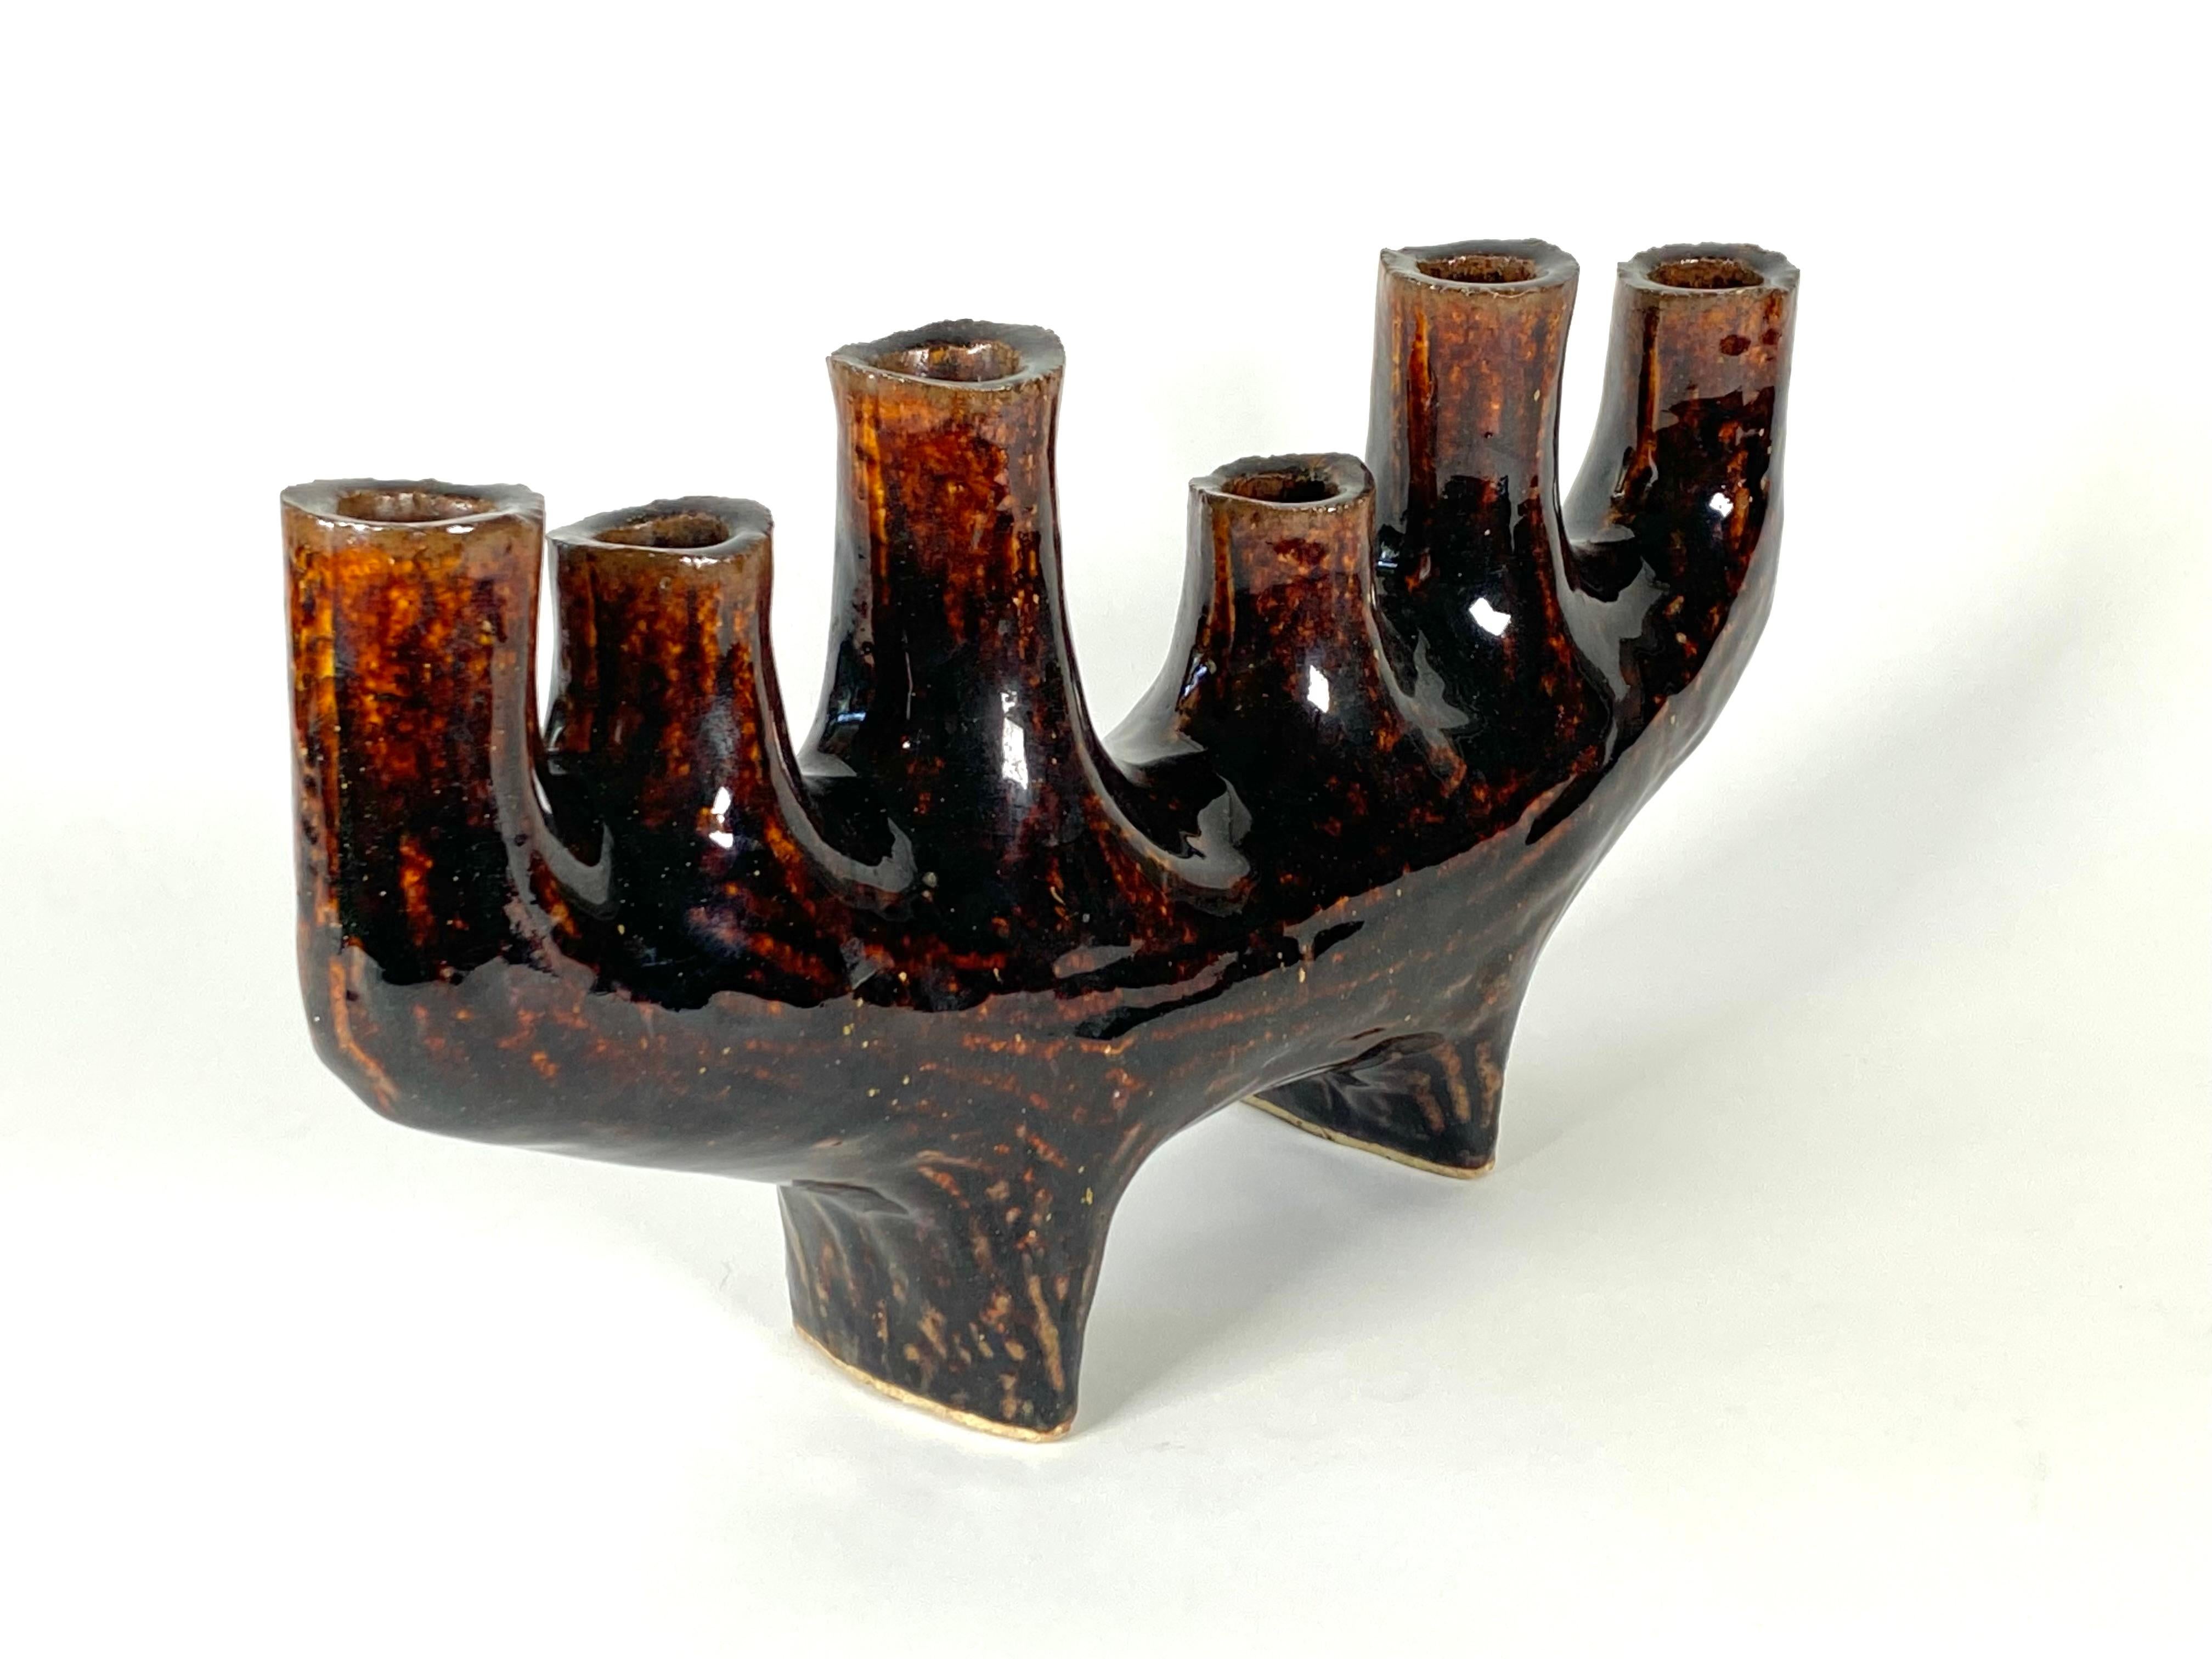 1960s abstract modernist footed ikebana vase in rich browns with a curved upward at the ends form. Having six graduating in height cylindrical columns, an unusual form. Markers mark on the bottom of one foot.